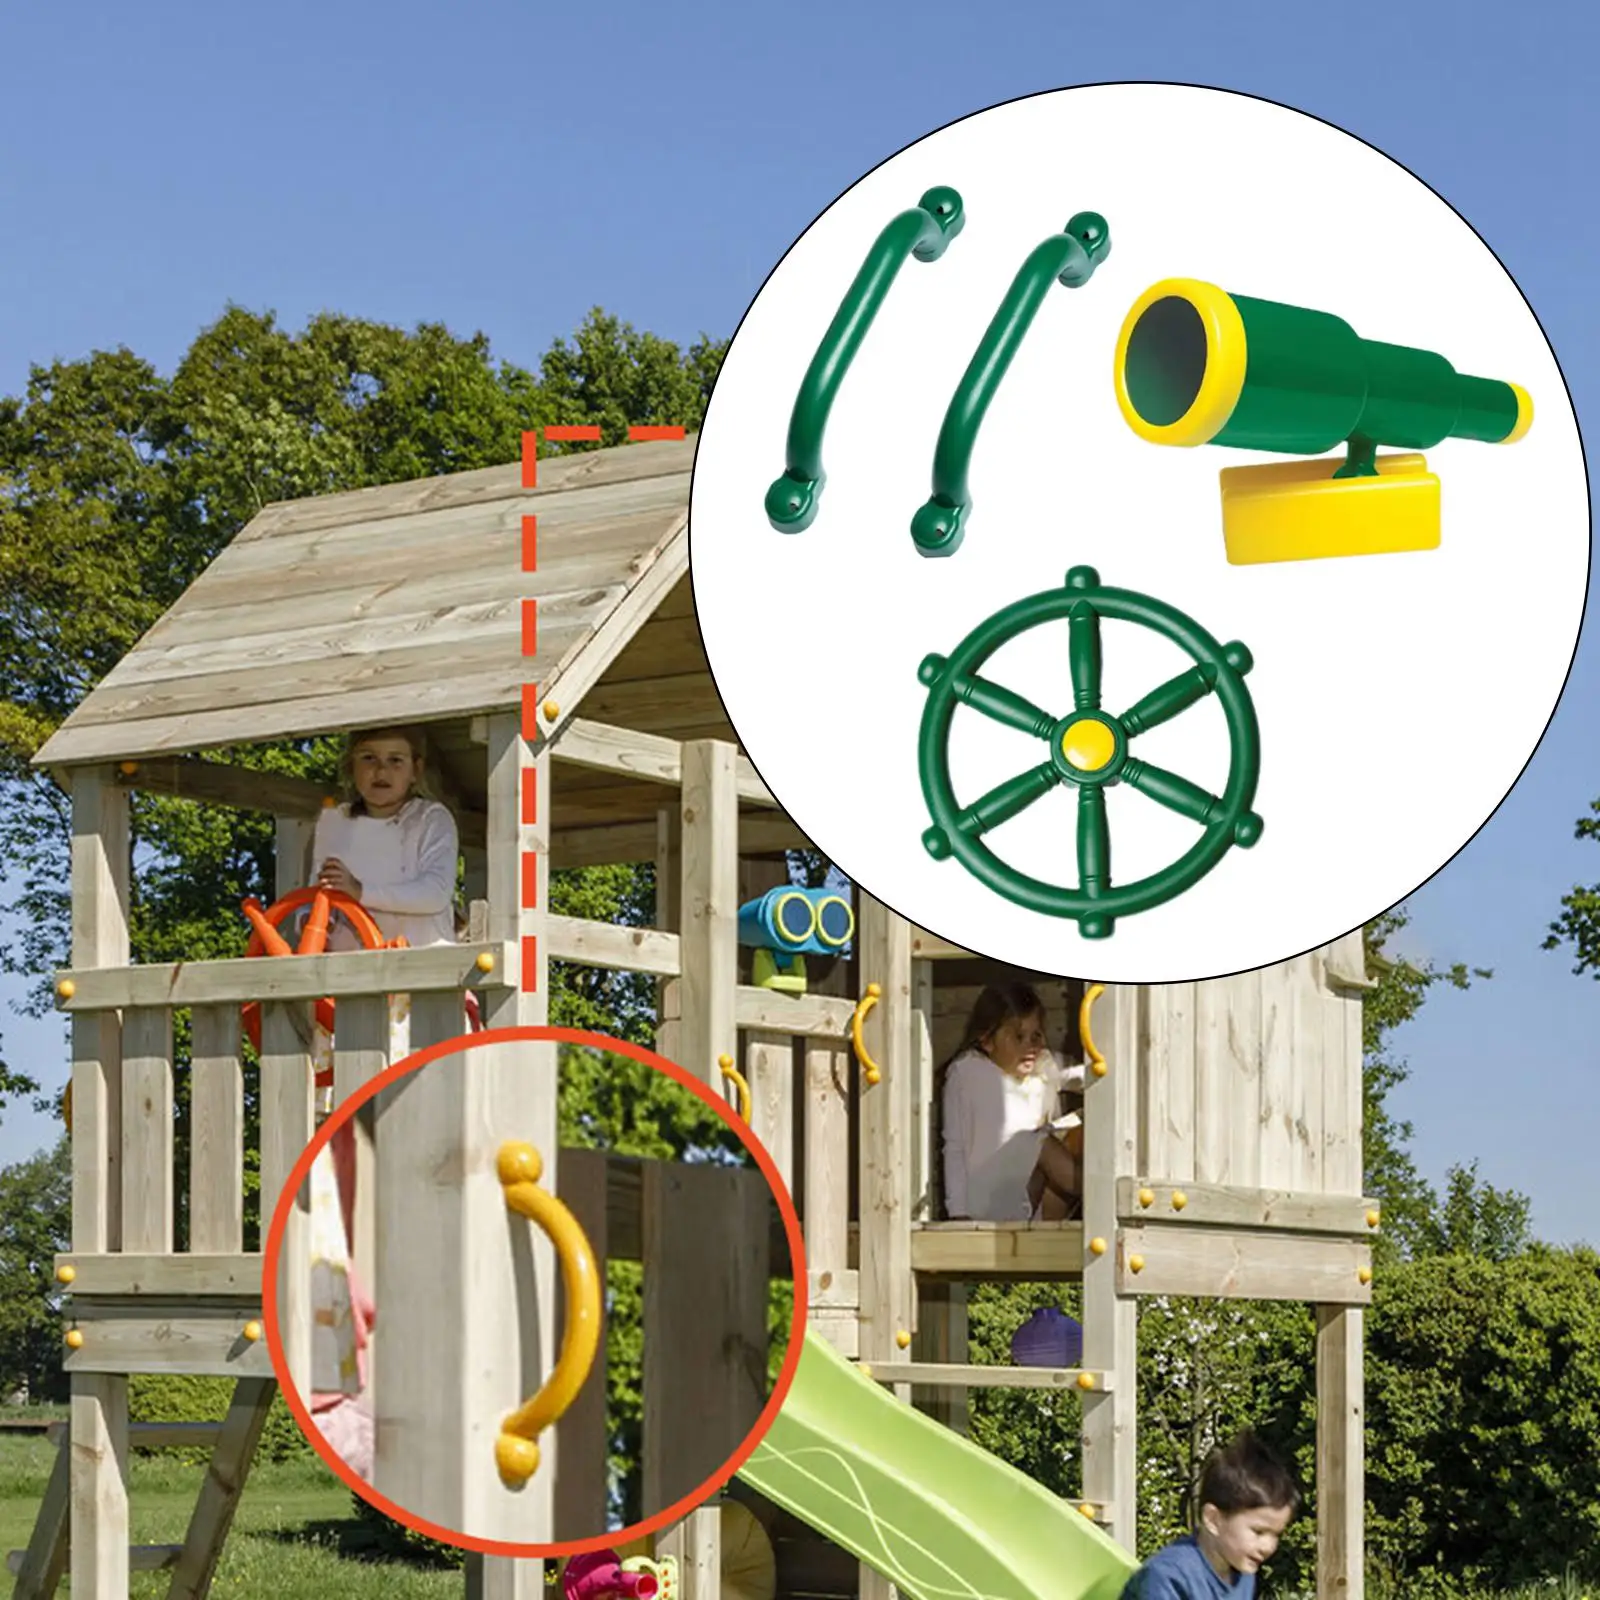 4 Pieces Playground Equipment Set Kids Pirate Telescope Steering Wheel & Safety Handle Bars for Treehouse